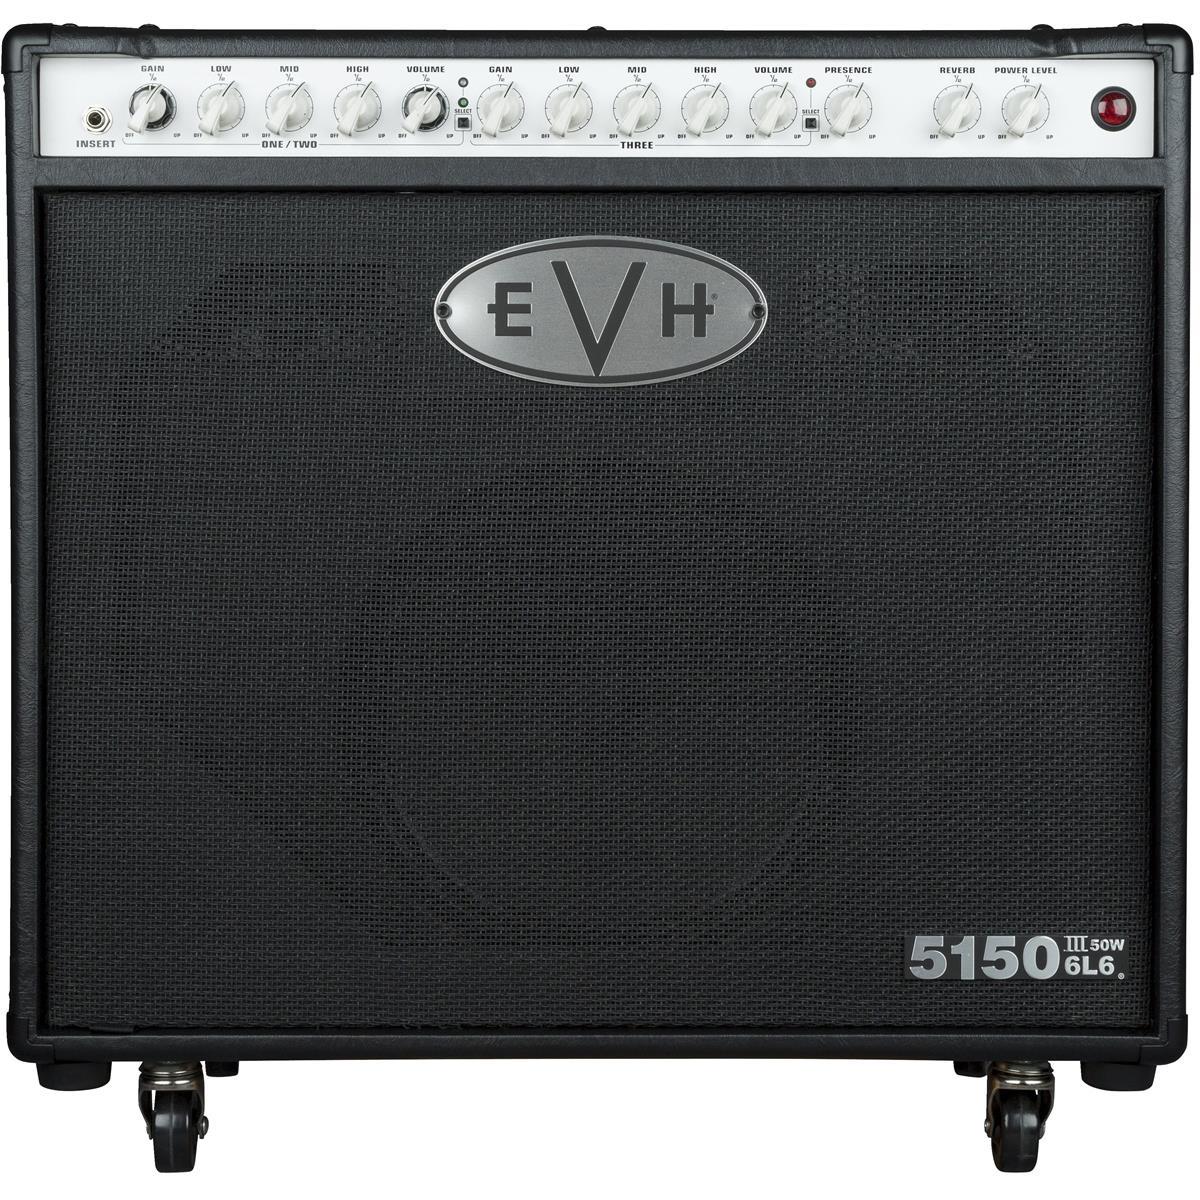 EVH 5150III 50W Amplifier with 6L6 112 Power Tube and 12" Speaker, Black Brimming with brawny tone, the EVH 5150III 50W 6L6 112 Combo is arena-sized sound in a Celestion powered compact package for more convenient transport. Redesigned with versatile, all-new independent dual- concentric controls that allow for gain and volume level matching, this 50-watt tube combo amp boasts three channels for any playing style- crisp cleans, raw crunch or searing leads.  Delivering a full-spectrum of tone, channel one features pristine cleans, channel two kicks in with overdrive and heavy gain similar to the EVH 5150III 100S, while channel three oozes with liquid distortion. Channels one and two each have dual concentric gain/volume controls, with shared EQ (low, mid, high). Channel three has its own gain, volume and EQ (low, mid, high) controls. All three channels also have global presence, resonance and reverb controls. Loaded with a 12" custom special designed EVH Celestion speaker to enhance and refine both your sound and your style, this combo amp also has seven JJ ECC83 (12AX7) preamp tubes, two JJ 6L6 power tubes and front-panel adjustable power output from 50 watts down to one watt.  Other features include a single input, rear-panel selectable output impedance (4, 8 or 16 ohms) with a pair of parallel speaker outputs, rear-panel MIDI input and preamp output, rear-panel effects loop and headphone jack (mutes power amp) and a four-button footswitch that controls all three channels and reverb for easy onstage switching. The cabinet is constructed out of birch with special internal baffling for tight and increased bass response. Wrapped in stylish Black or Ivory vinyl, this combo is finished off with vintage-style chicken-knobs, red LED jewel indicator, molded black plastic top handle and pop- out casters. A high-quality fitted cover is available as an EVH Accessory.